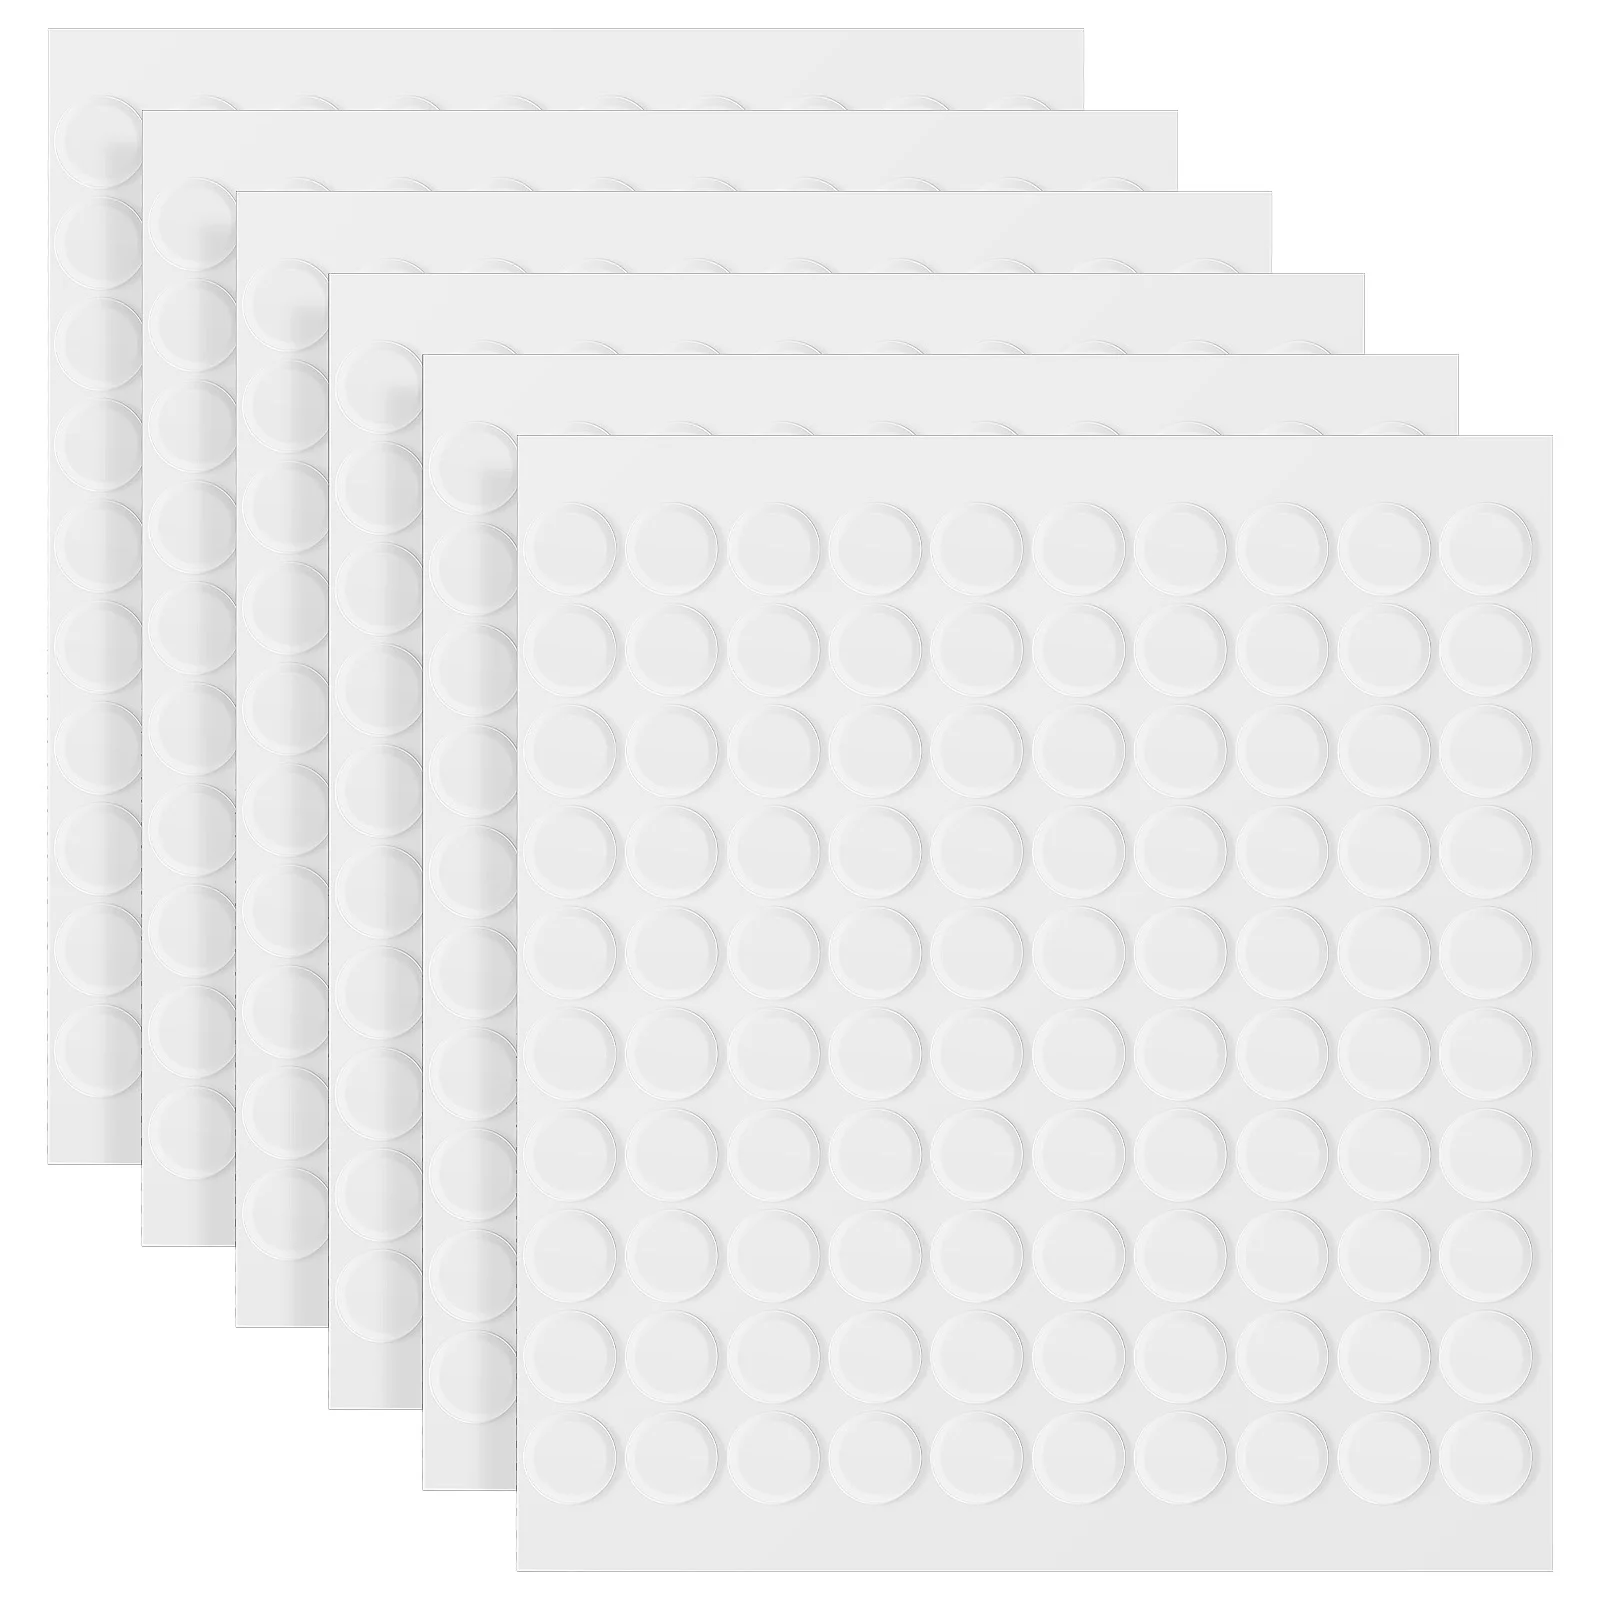 

600pcs Double Sided Adhesive Dots Sticky Dots Craft Glue Points Easily Removable Clear Acrylic Adhesive Dots